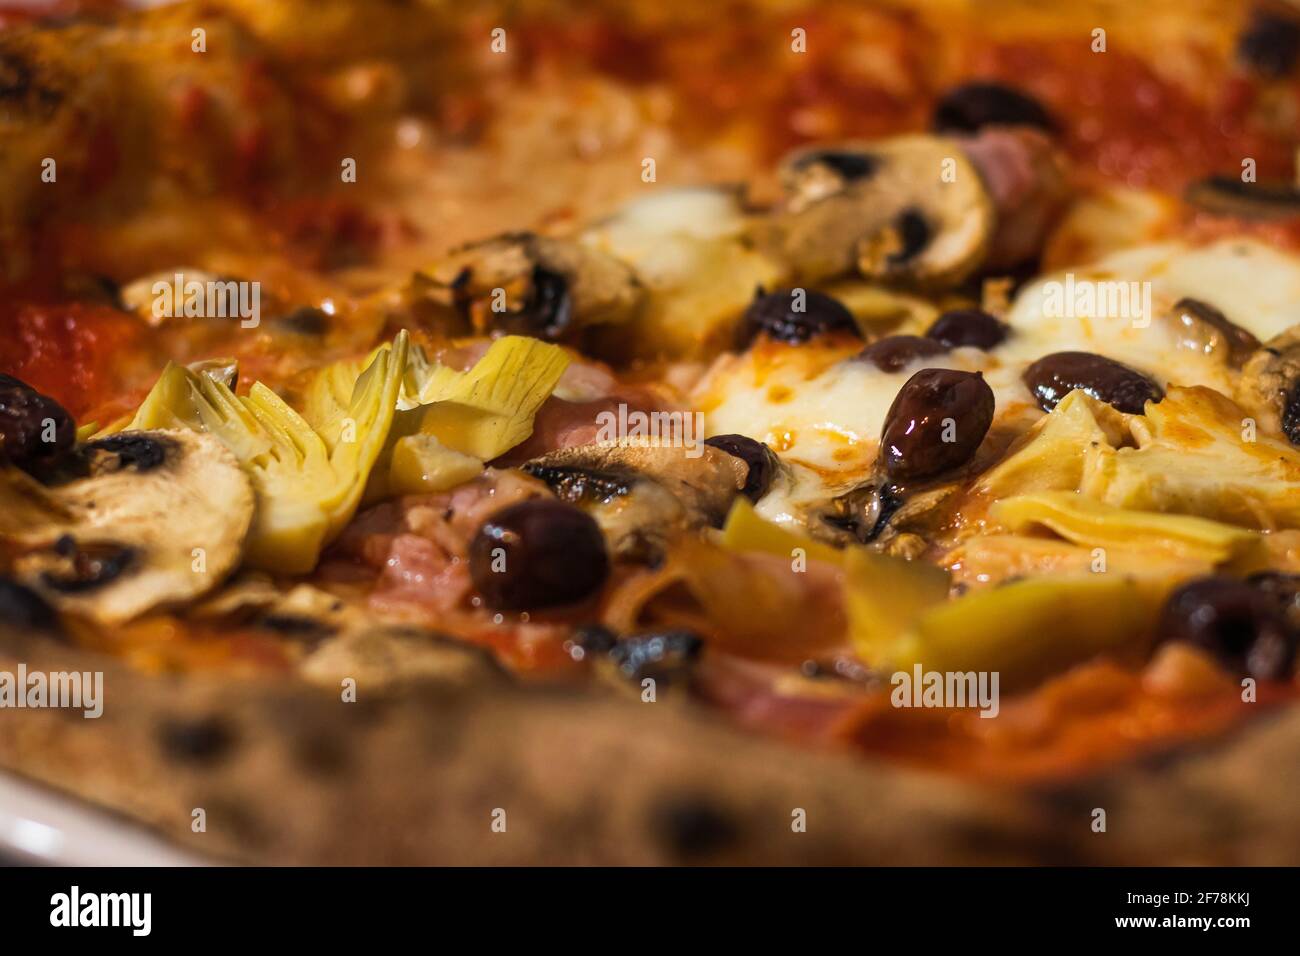 detail of a richly stuffed pizza Stock Photo